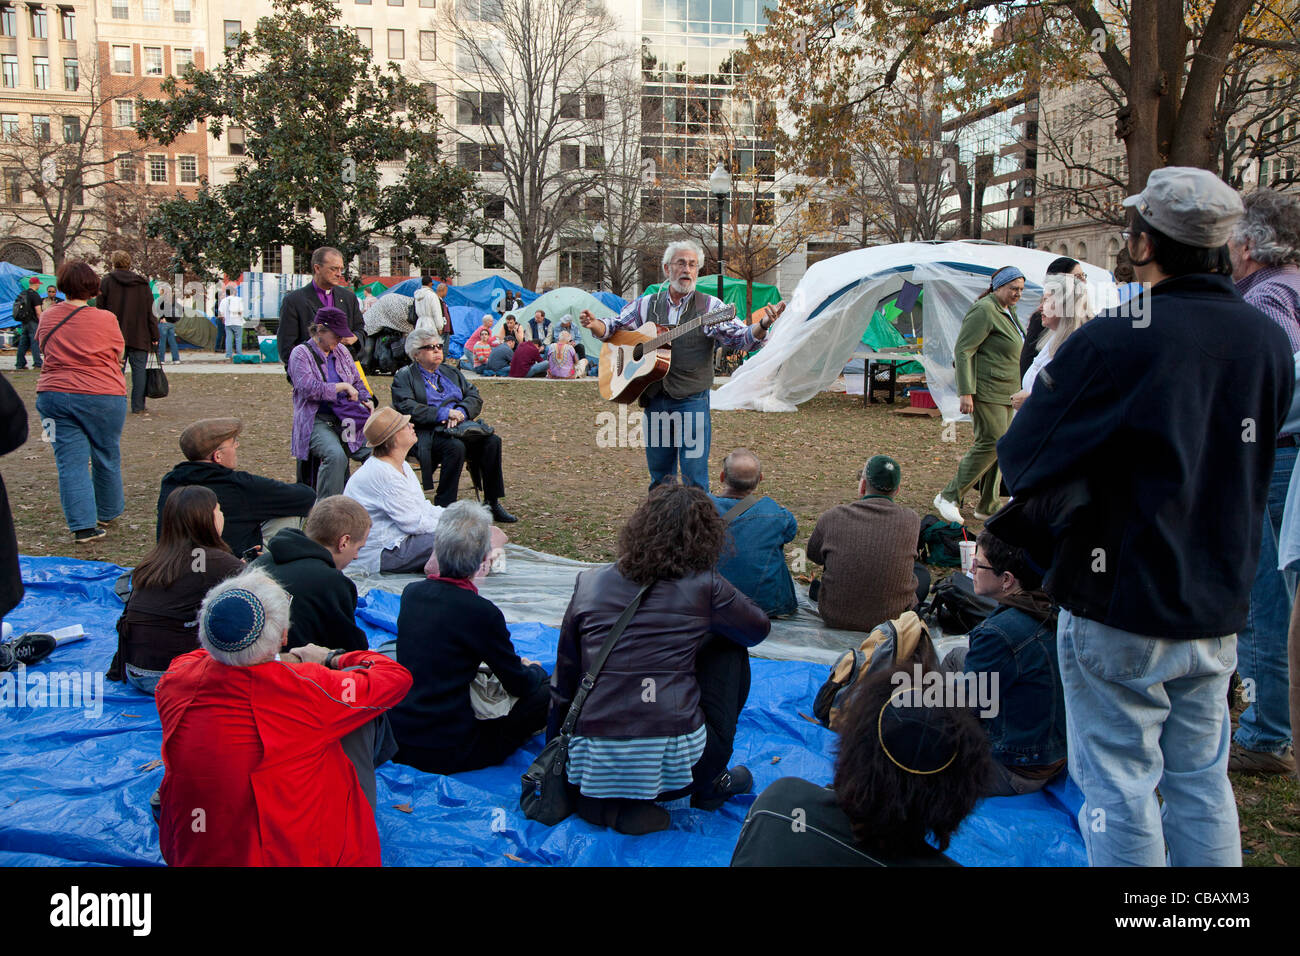 Washington, DC - Interfaith activists hold a religious service at the Occupy DC camp in McPherson Square. Stock Photo